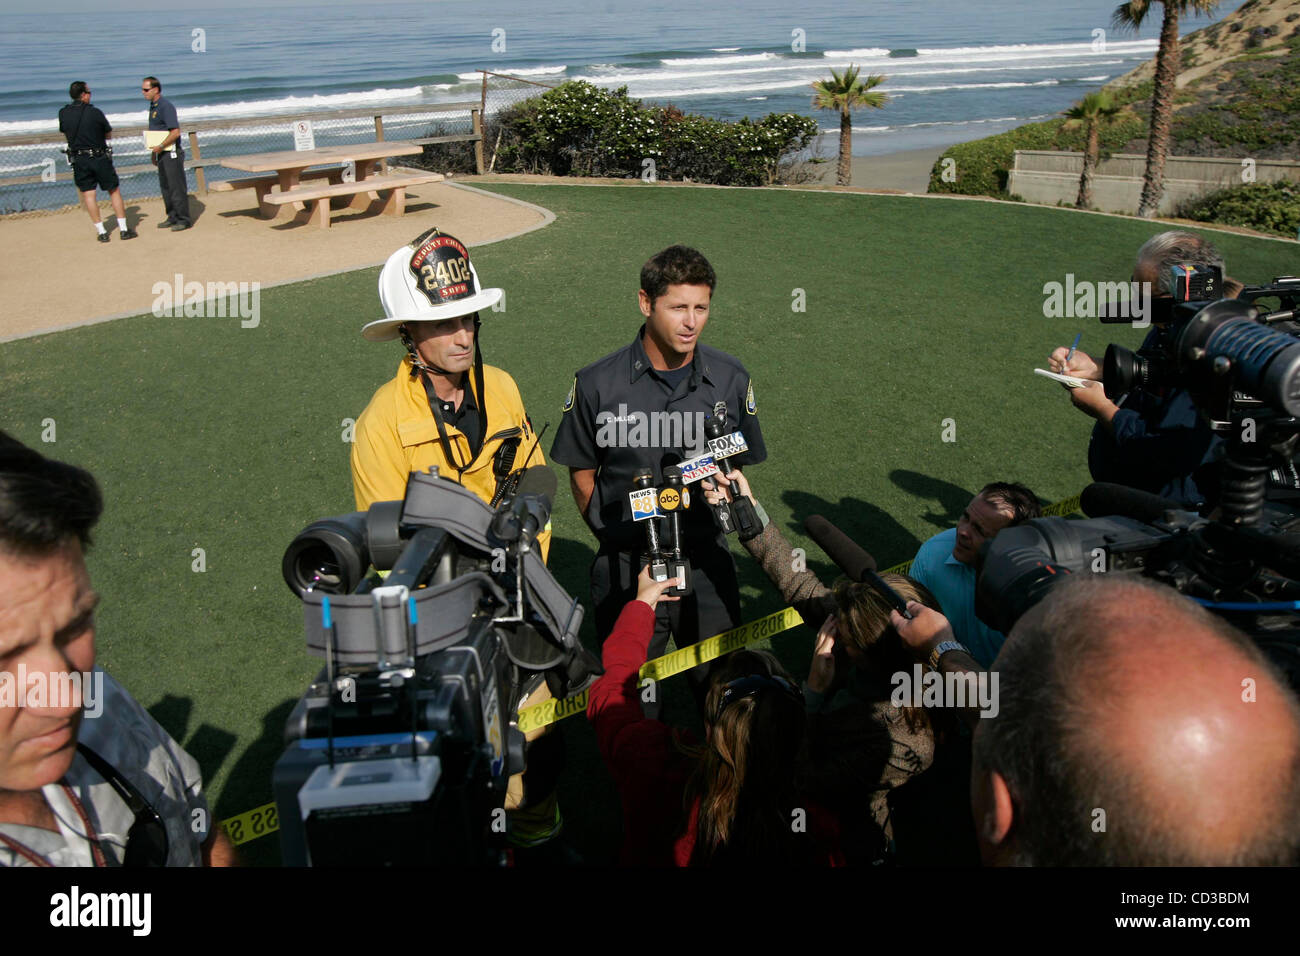 April 25th, 2008, Solana beach, California, USA.This is the scene of a shark attack at Fletcher Cove on Friday in Solana Beach, California. The woman in the photos was identified as the daughter off the deceased victim. The press coference is Deputy Fire Chief Dismas Abelmman, Solana Beach FD,(left) Stock Photo